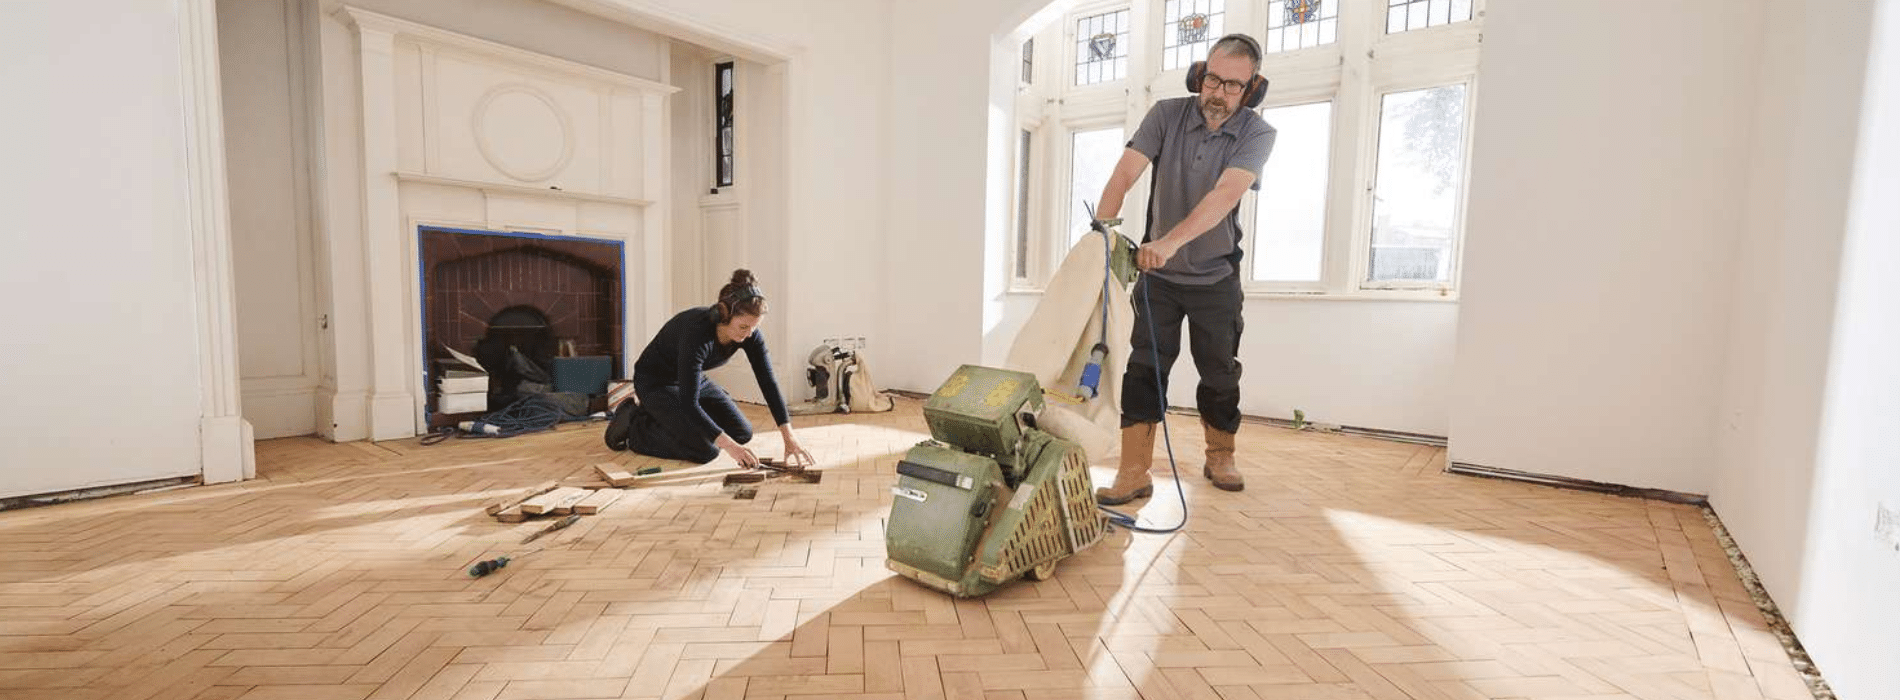 In Tufnell Park, N19, Mr Sander® are using a Bona Scorpion, a 200mm drum sander with 1.5 kW power, 240V voltage, and 50 Hz frequency. The sander is connected to a dust extraction system with a HEPA filter, ensuring a clean and efficient result while sanding a herringbone floor. 